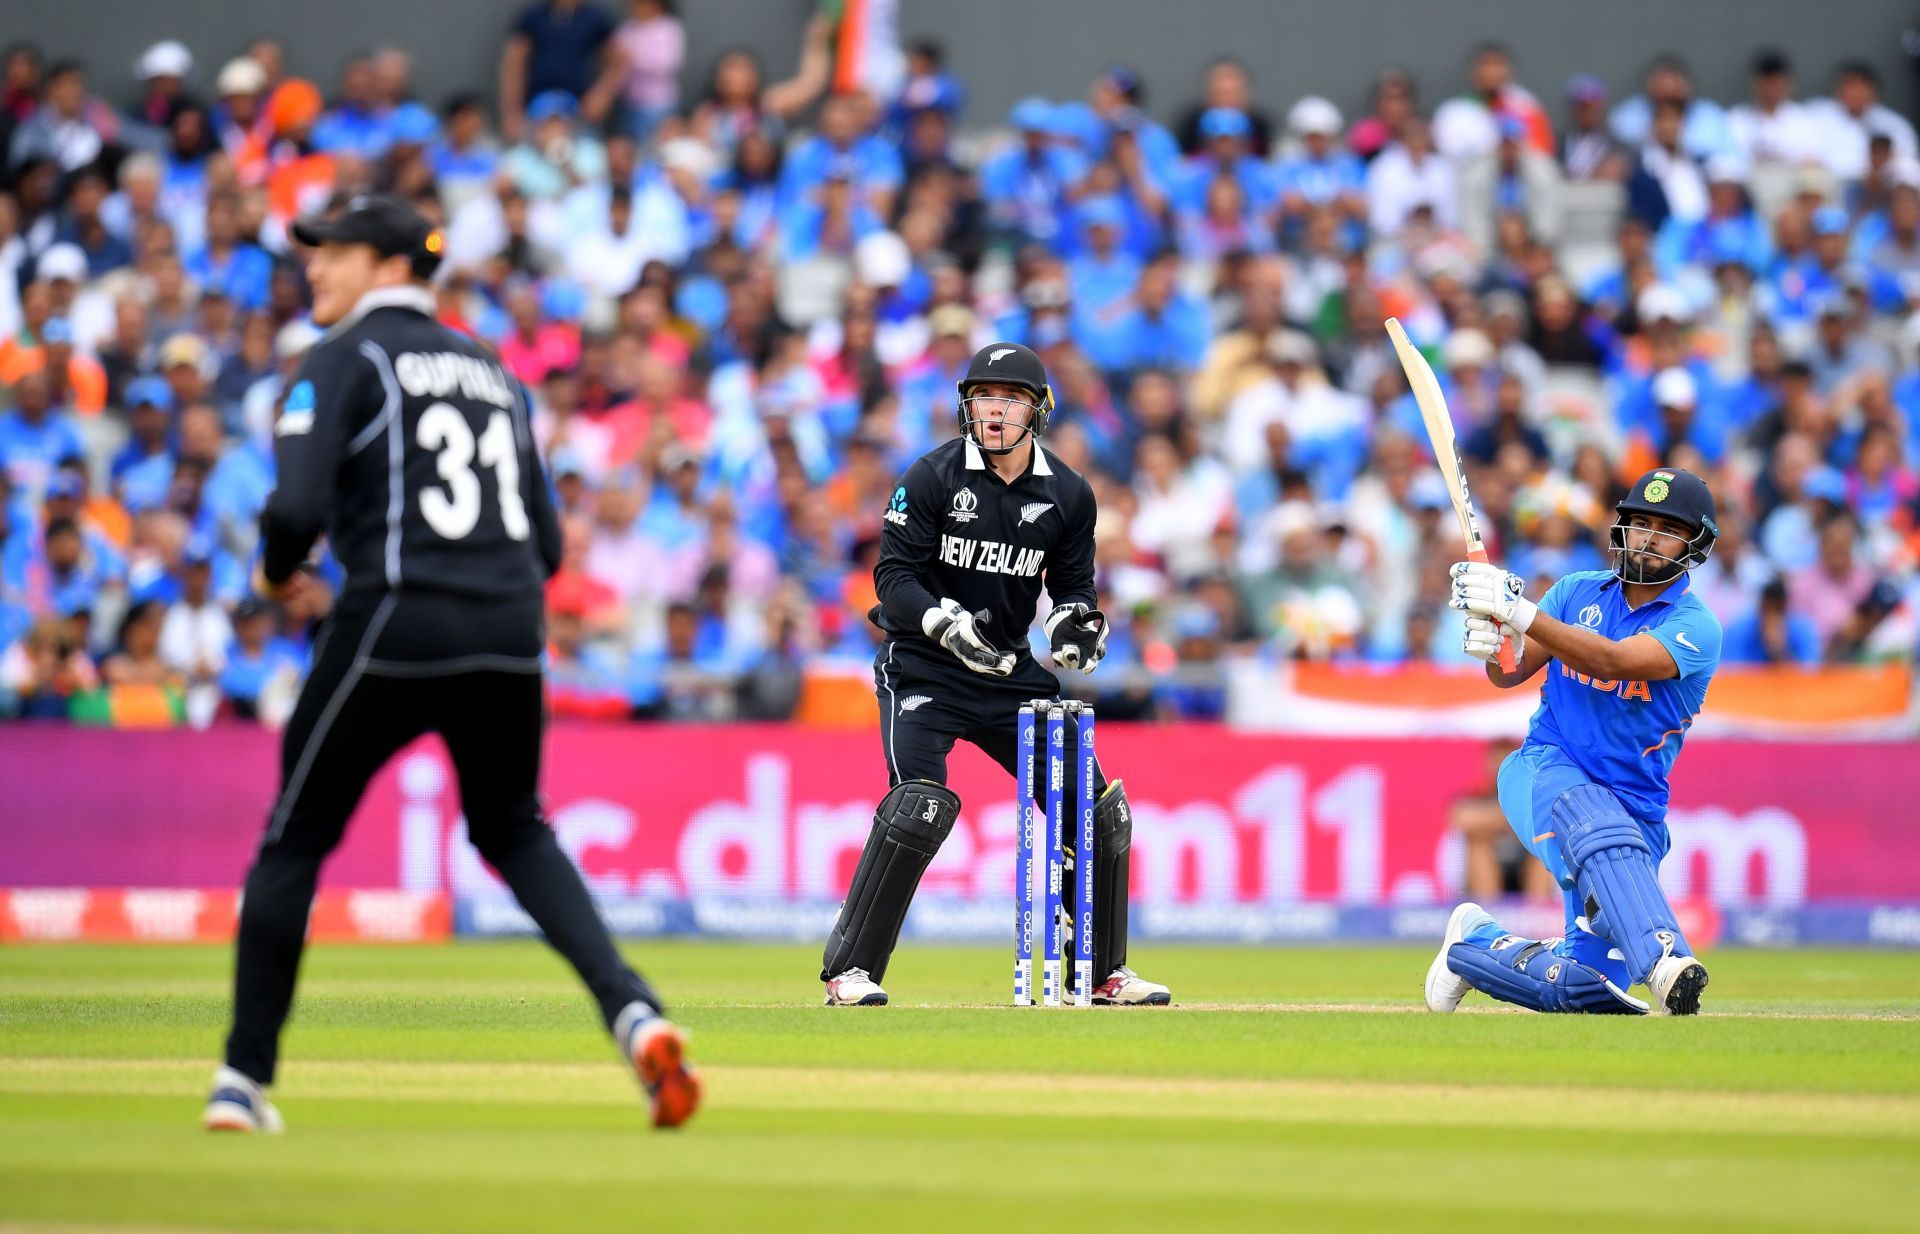 Rishabh Pant&#039;s dismissal at the ICC Cricket World Cup 2019 semi-final. (Getty Images)